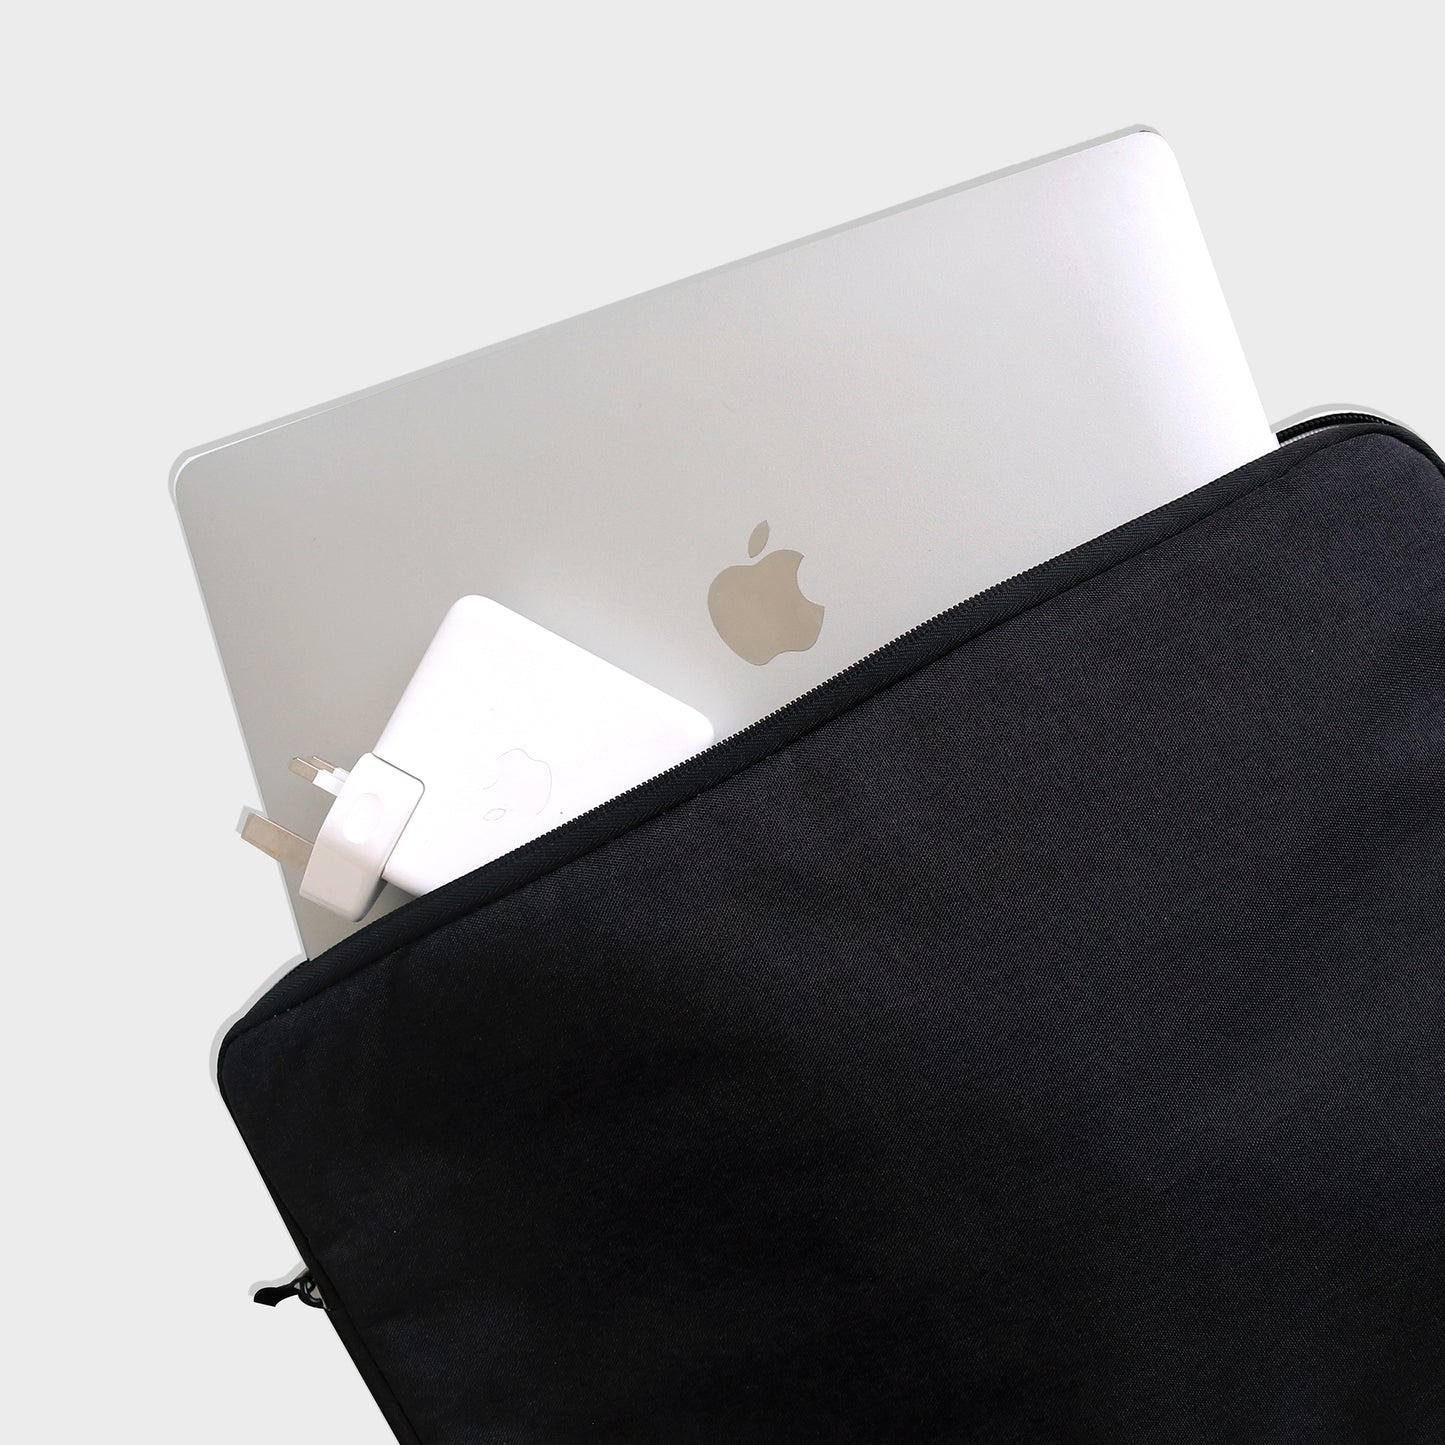 Universal Laptop Pouch - Good Day 2.0